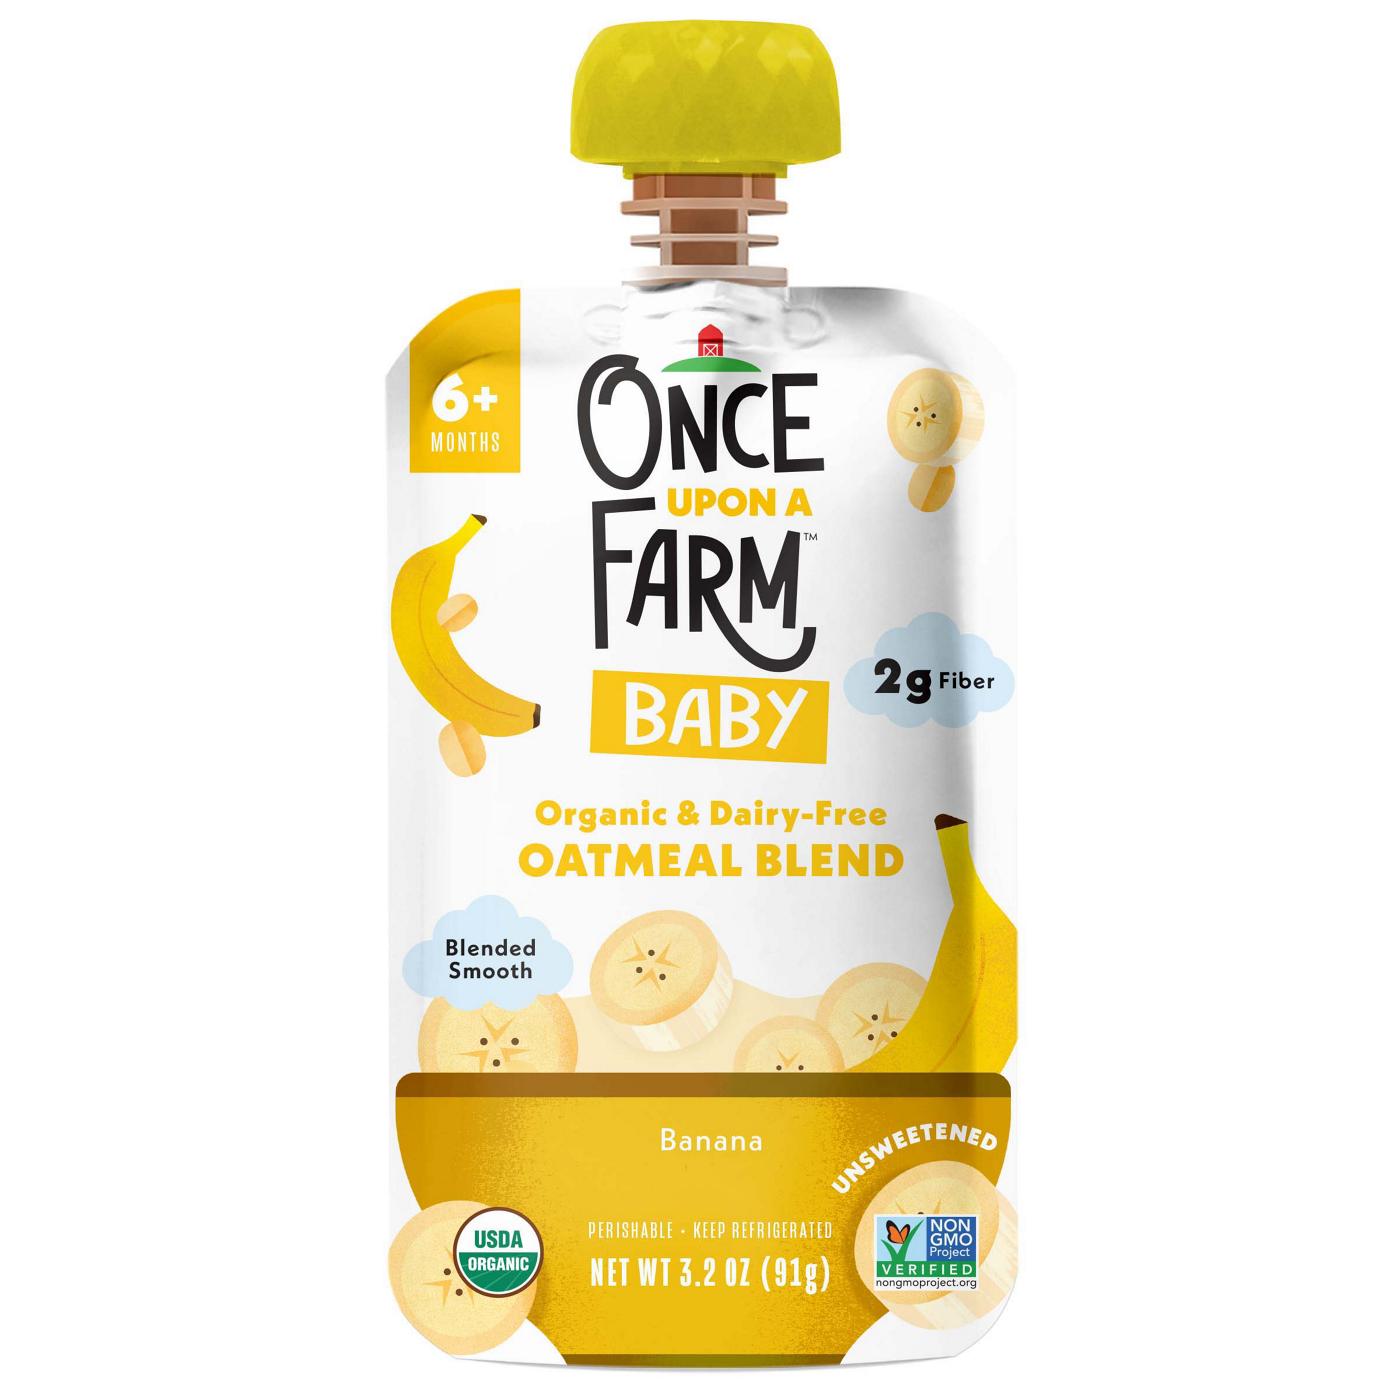 Once Upon a Farm Organic Oatmeal Blend Baby Food Pouch - Banana; image 1 of 2